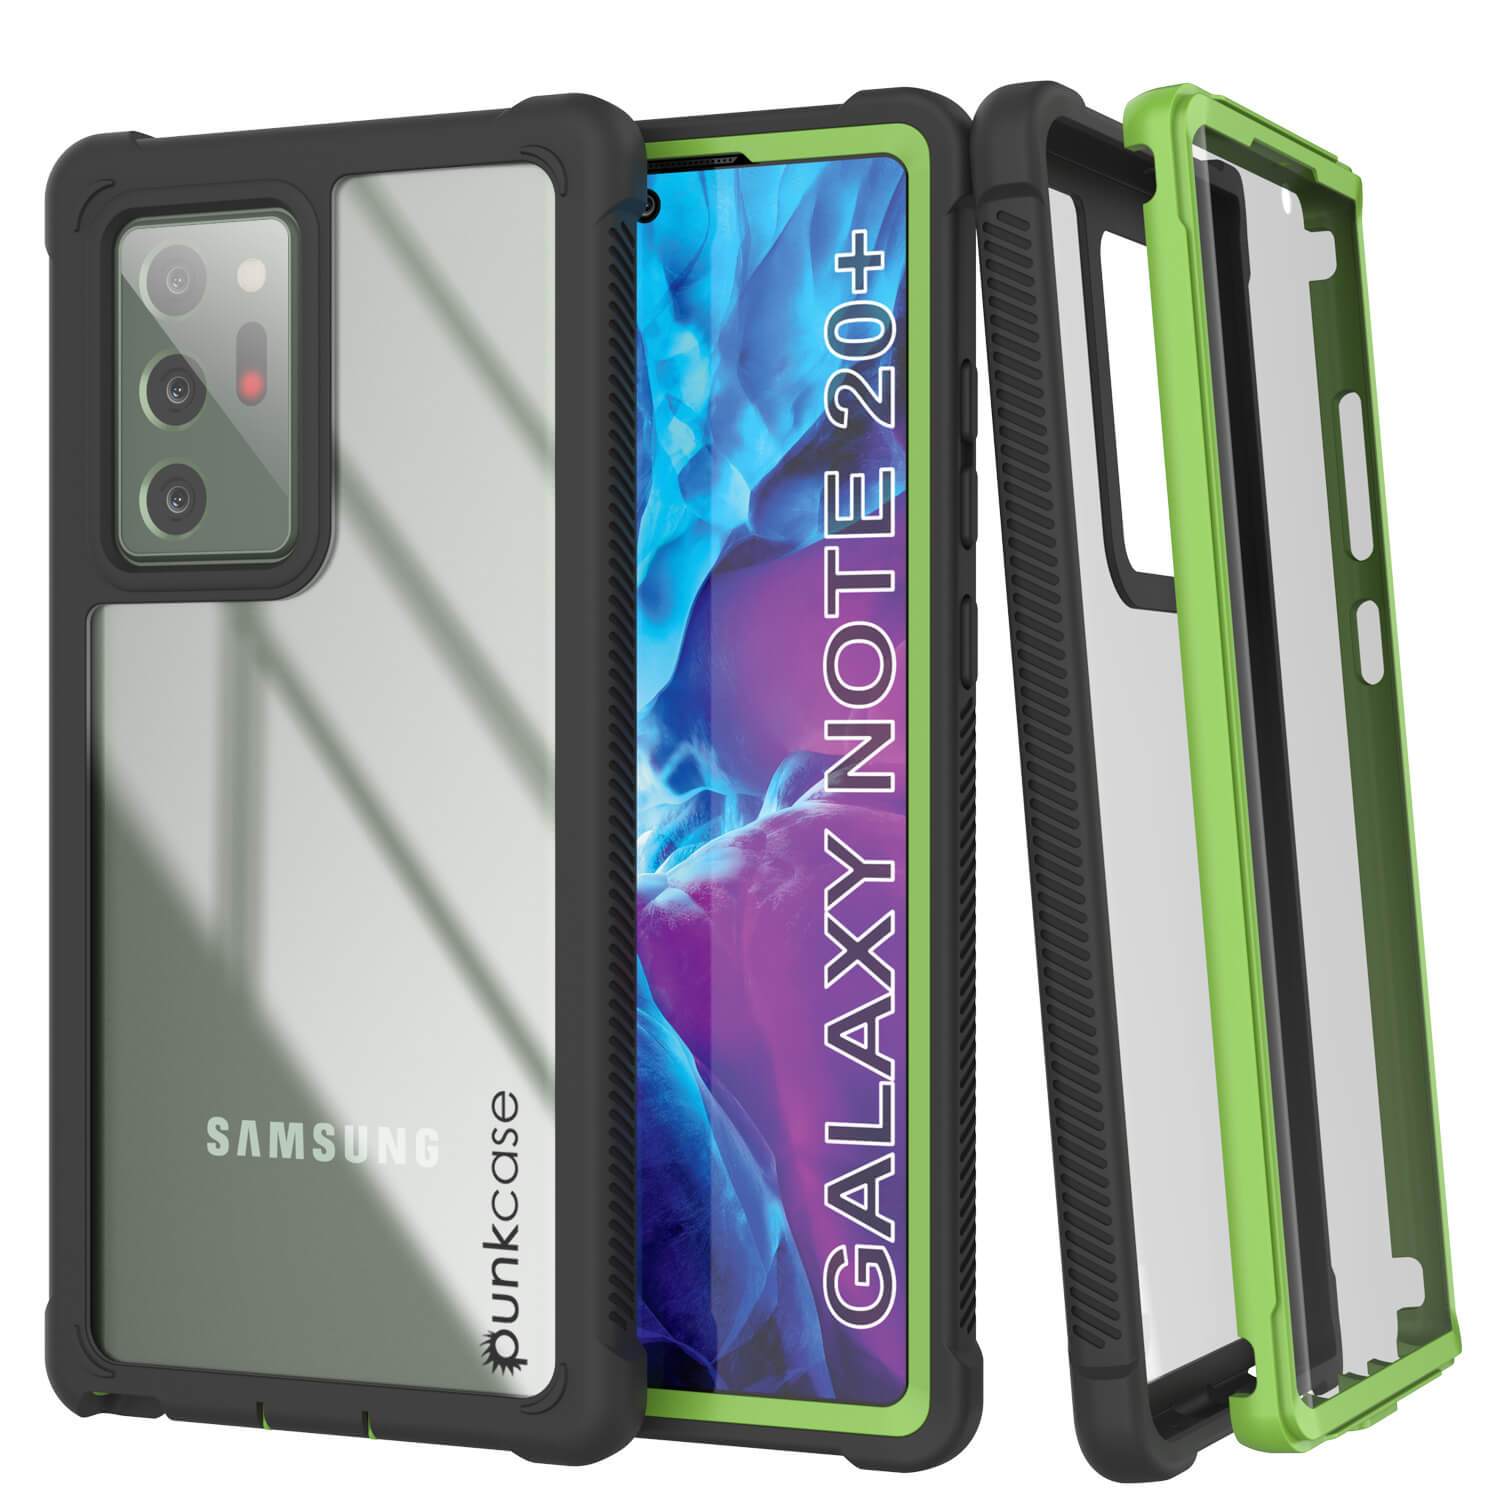 Punkcase Galaxy Note 20 Ultra Case, [Spartan Series] Light Green Rugged Heavy Duty Cover W/Built in Screen Protector